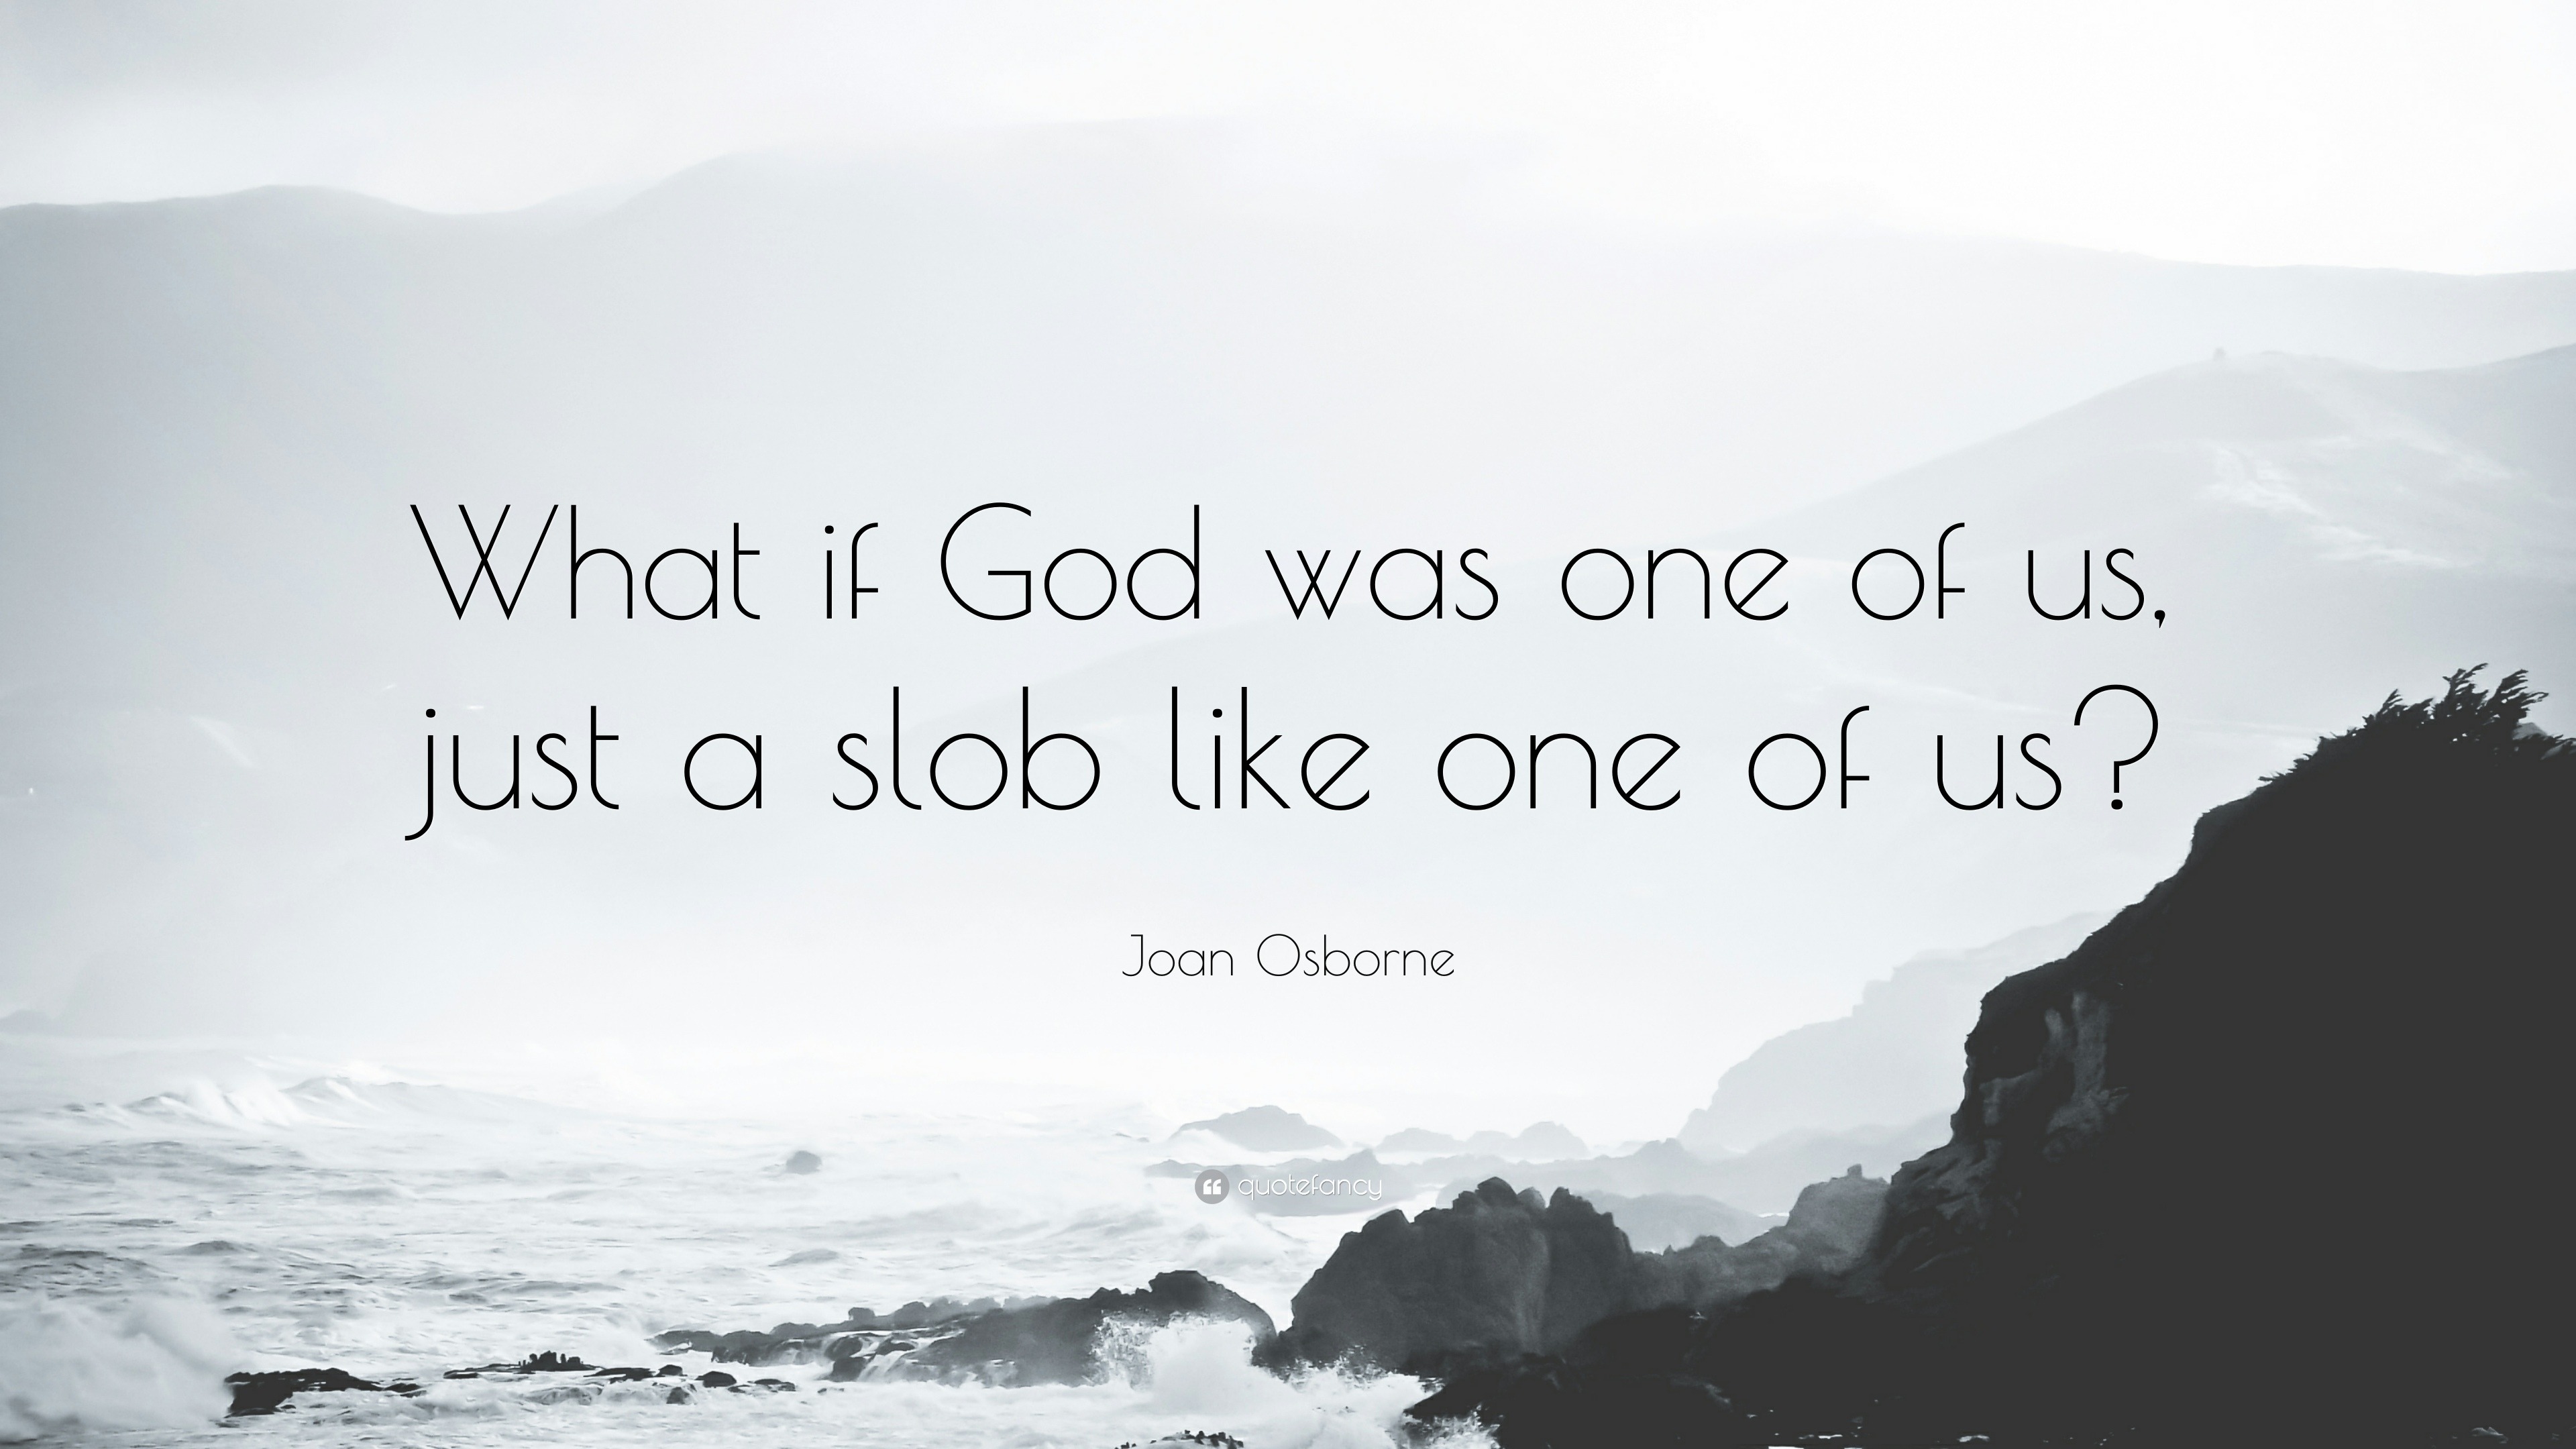 Joan Osborne Quote: “What if God was one of us, just a slob like ...